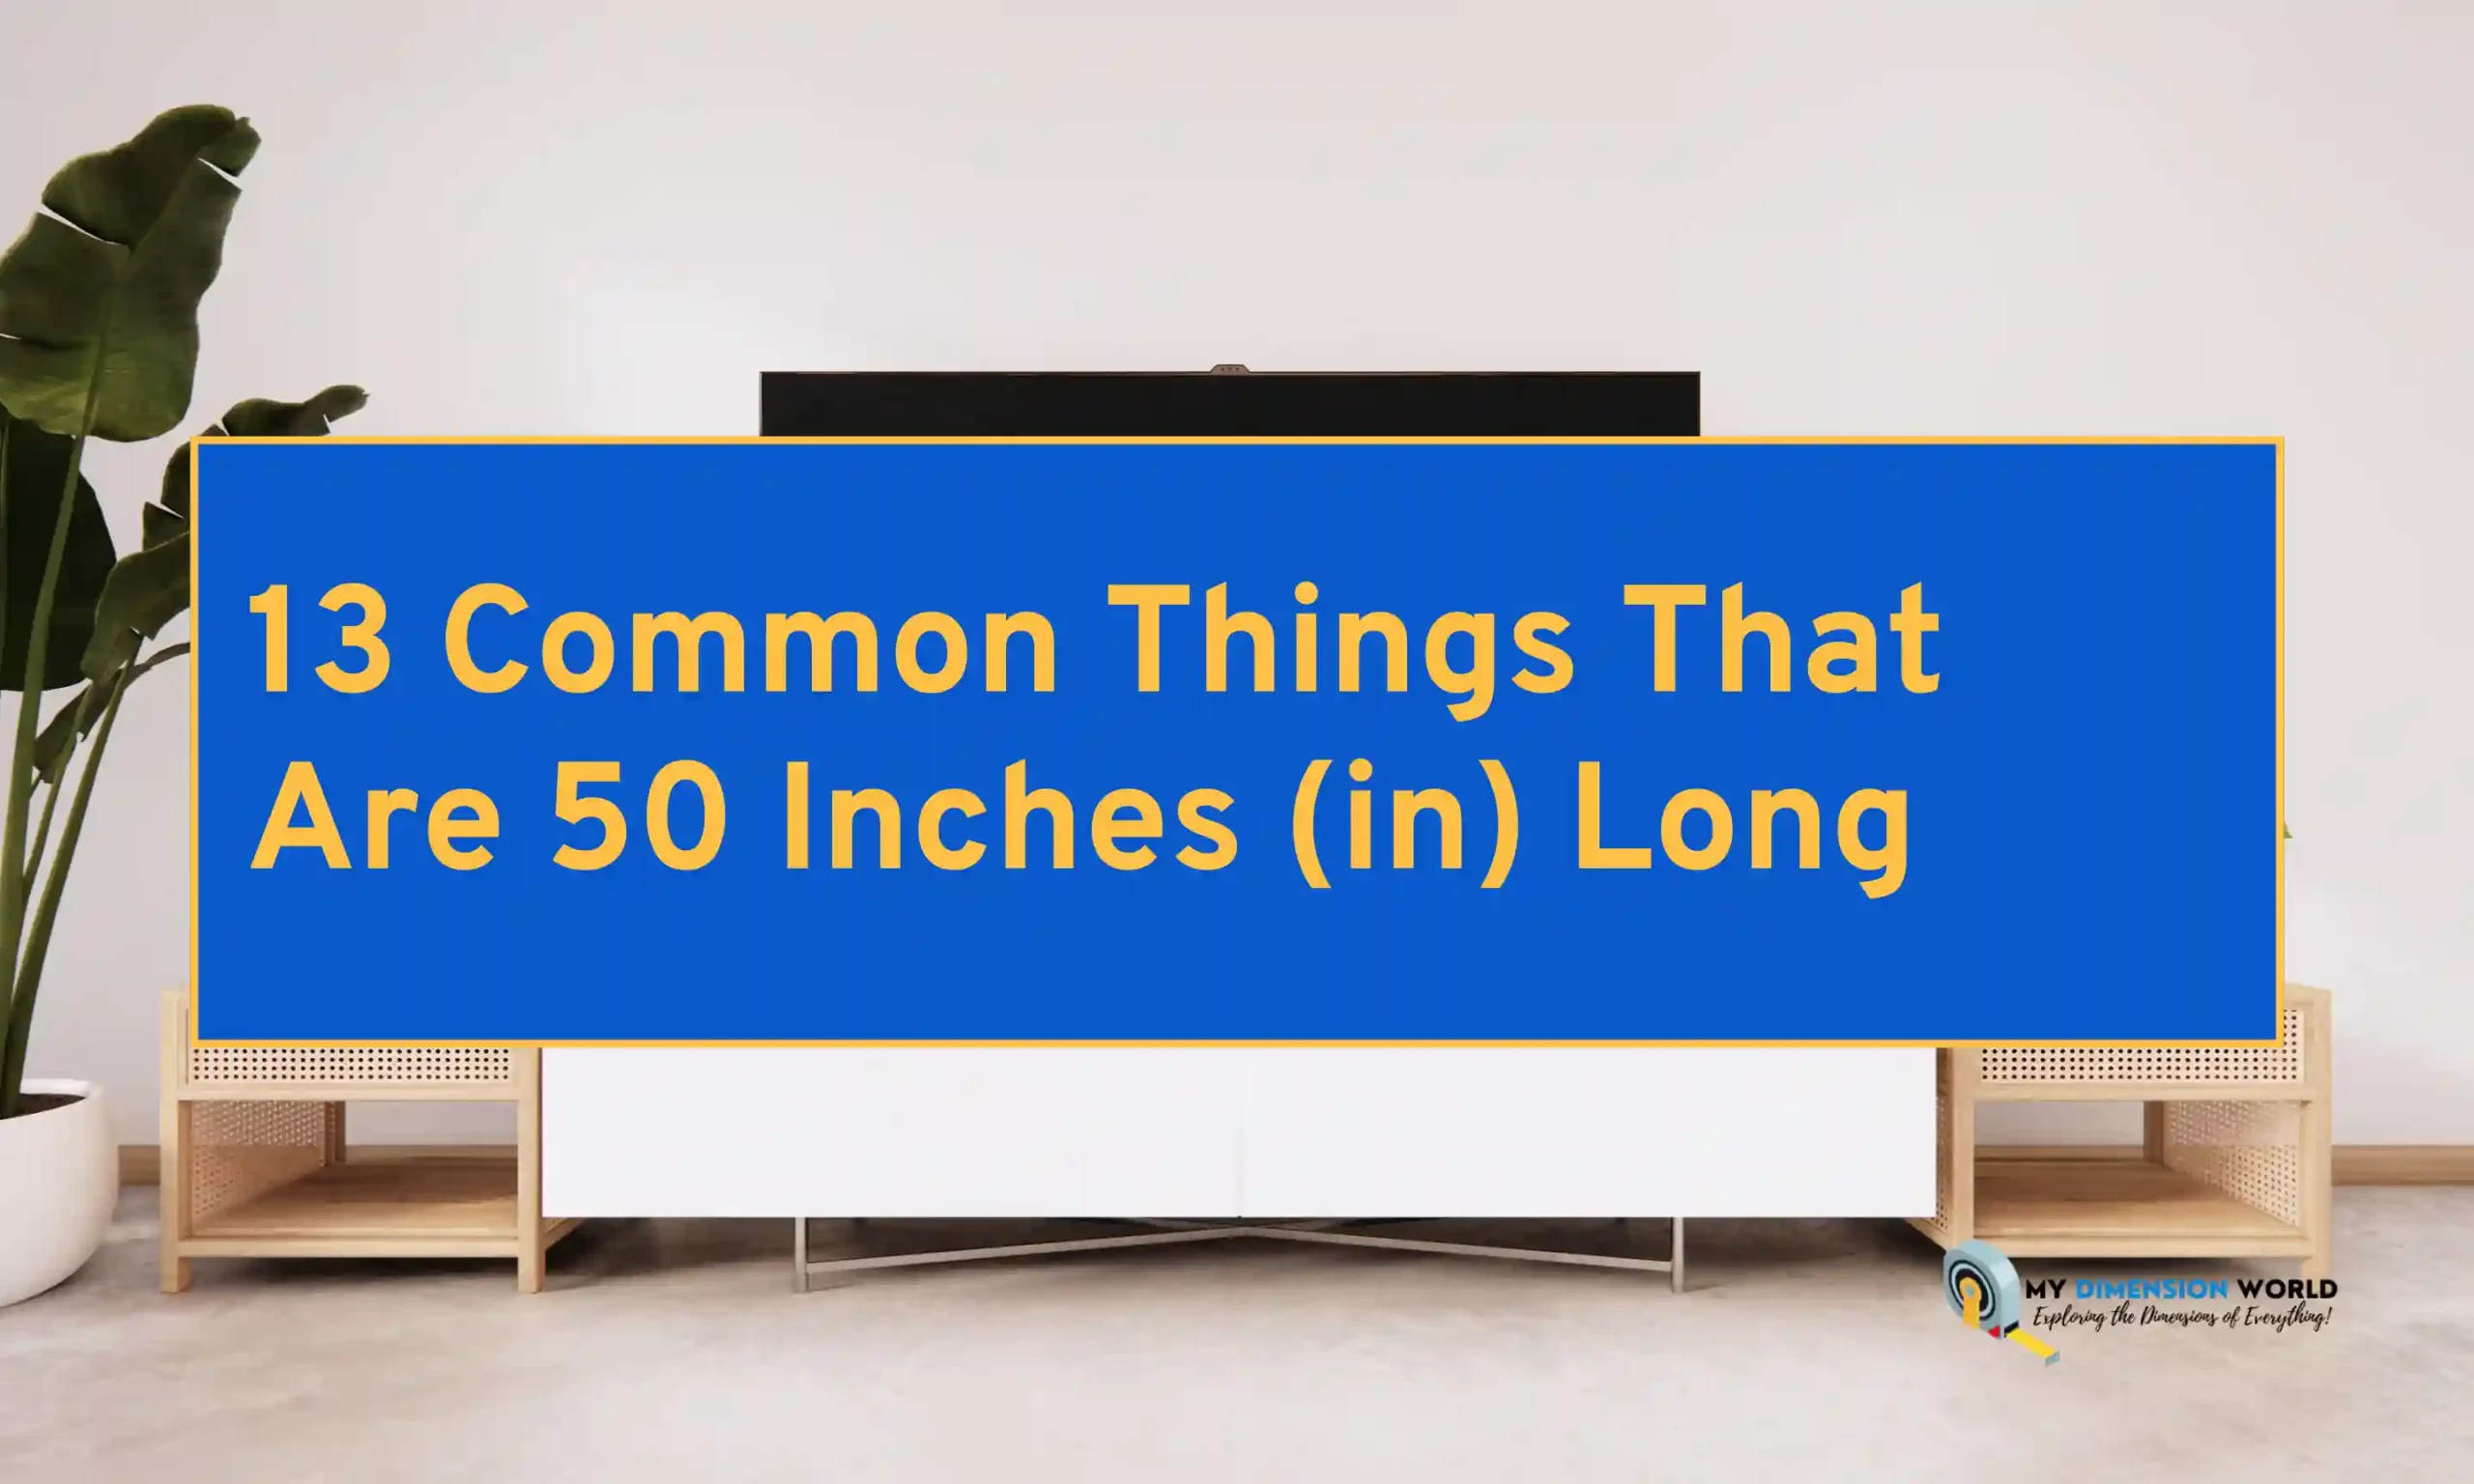 13 Common Things That Are 50 Inches (in) Long